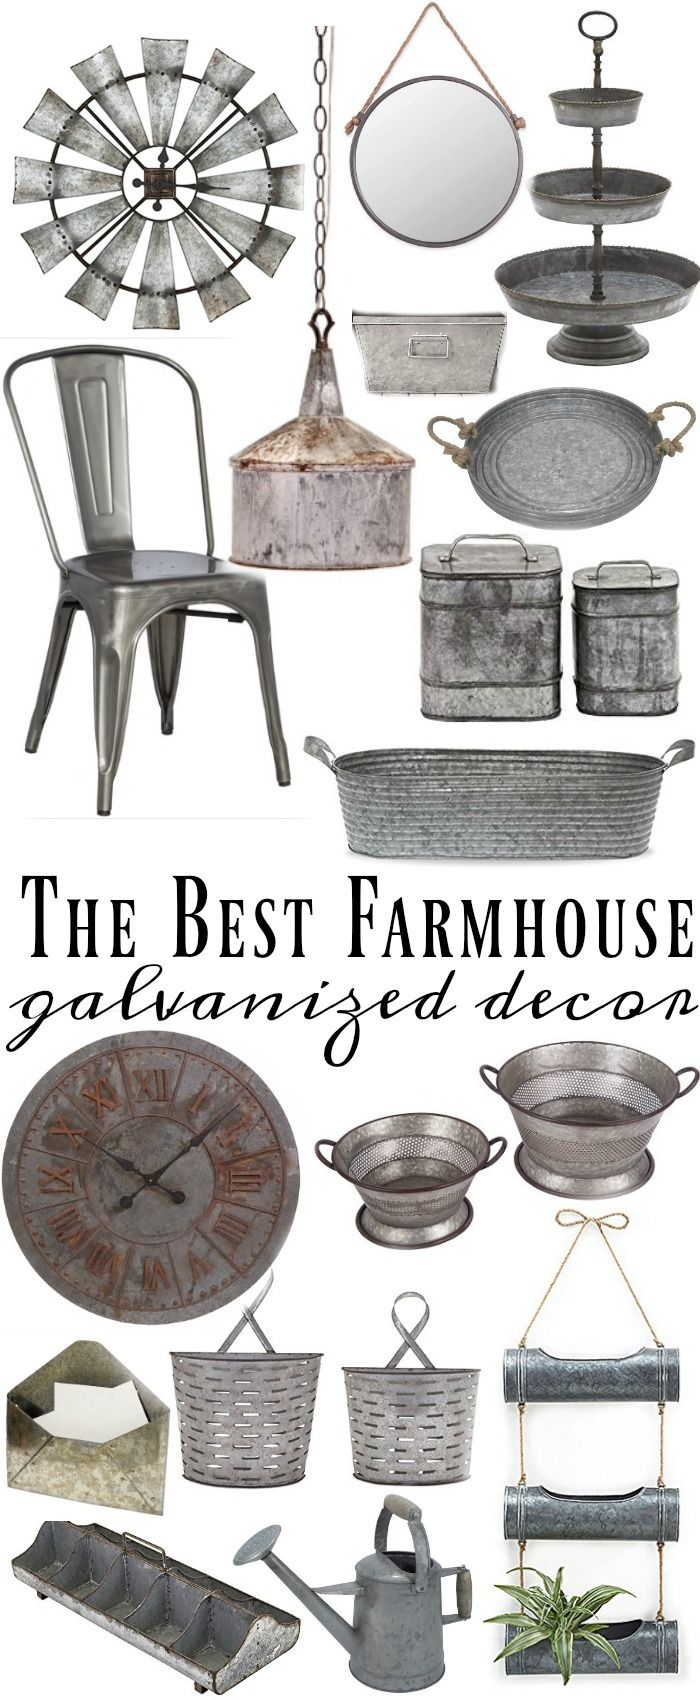 Where To Find The Best Galvanized Home Decor